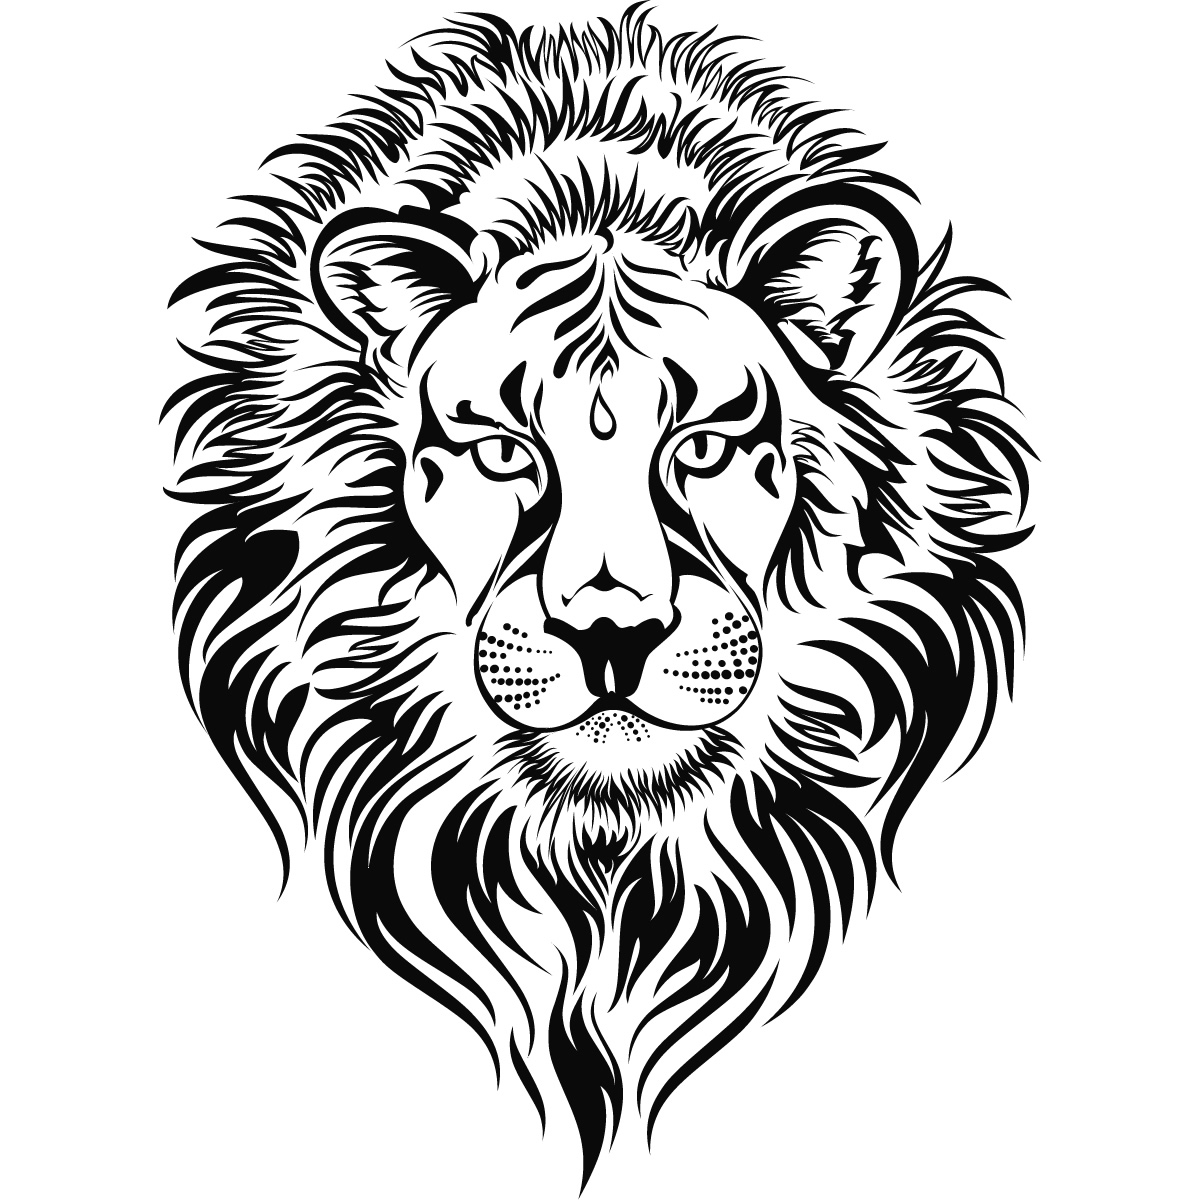 Lion Head Drawing - ClipArt Best